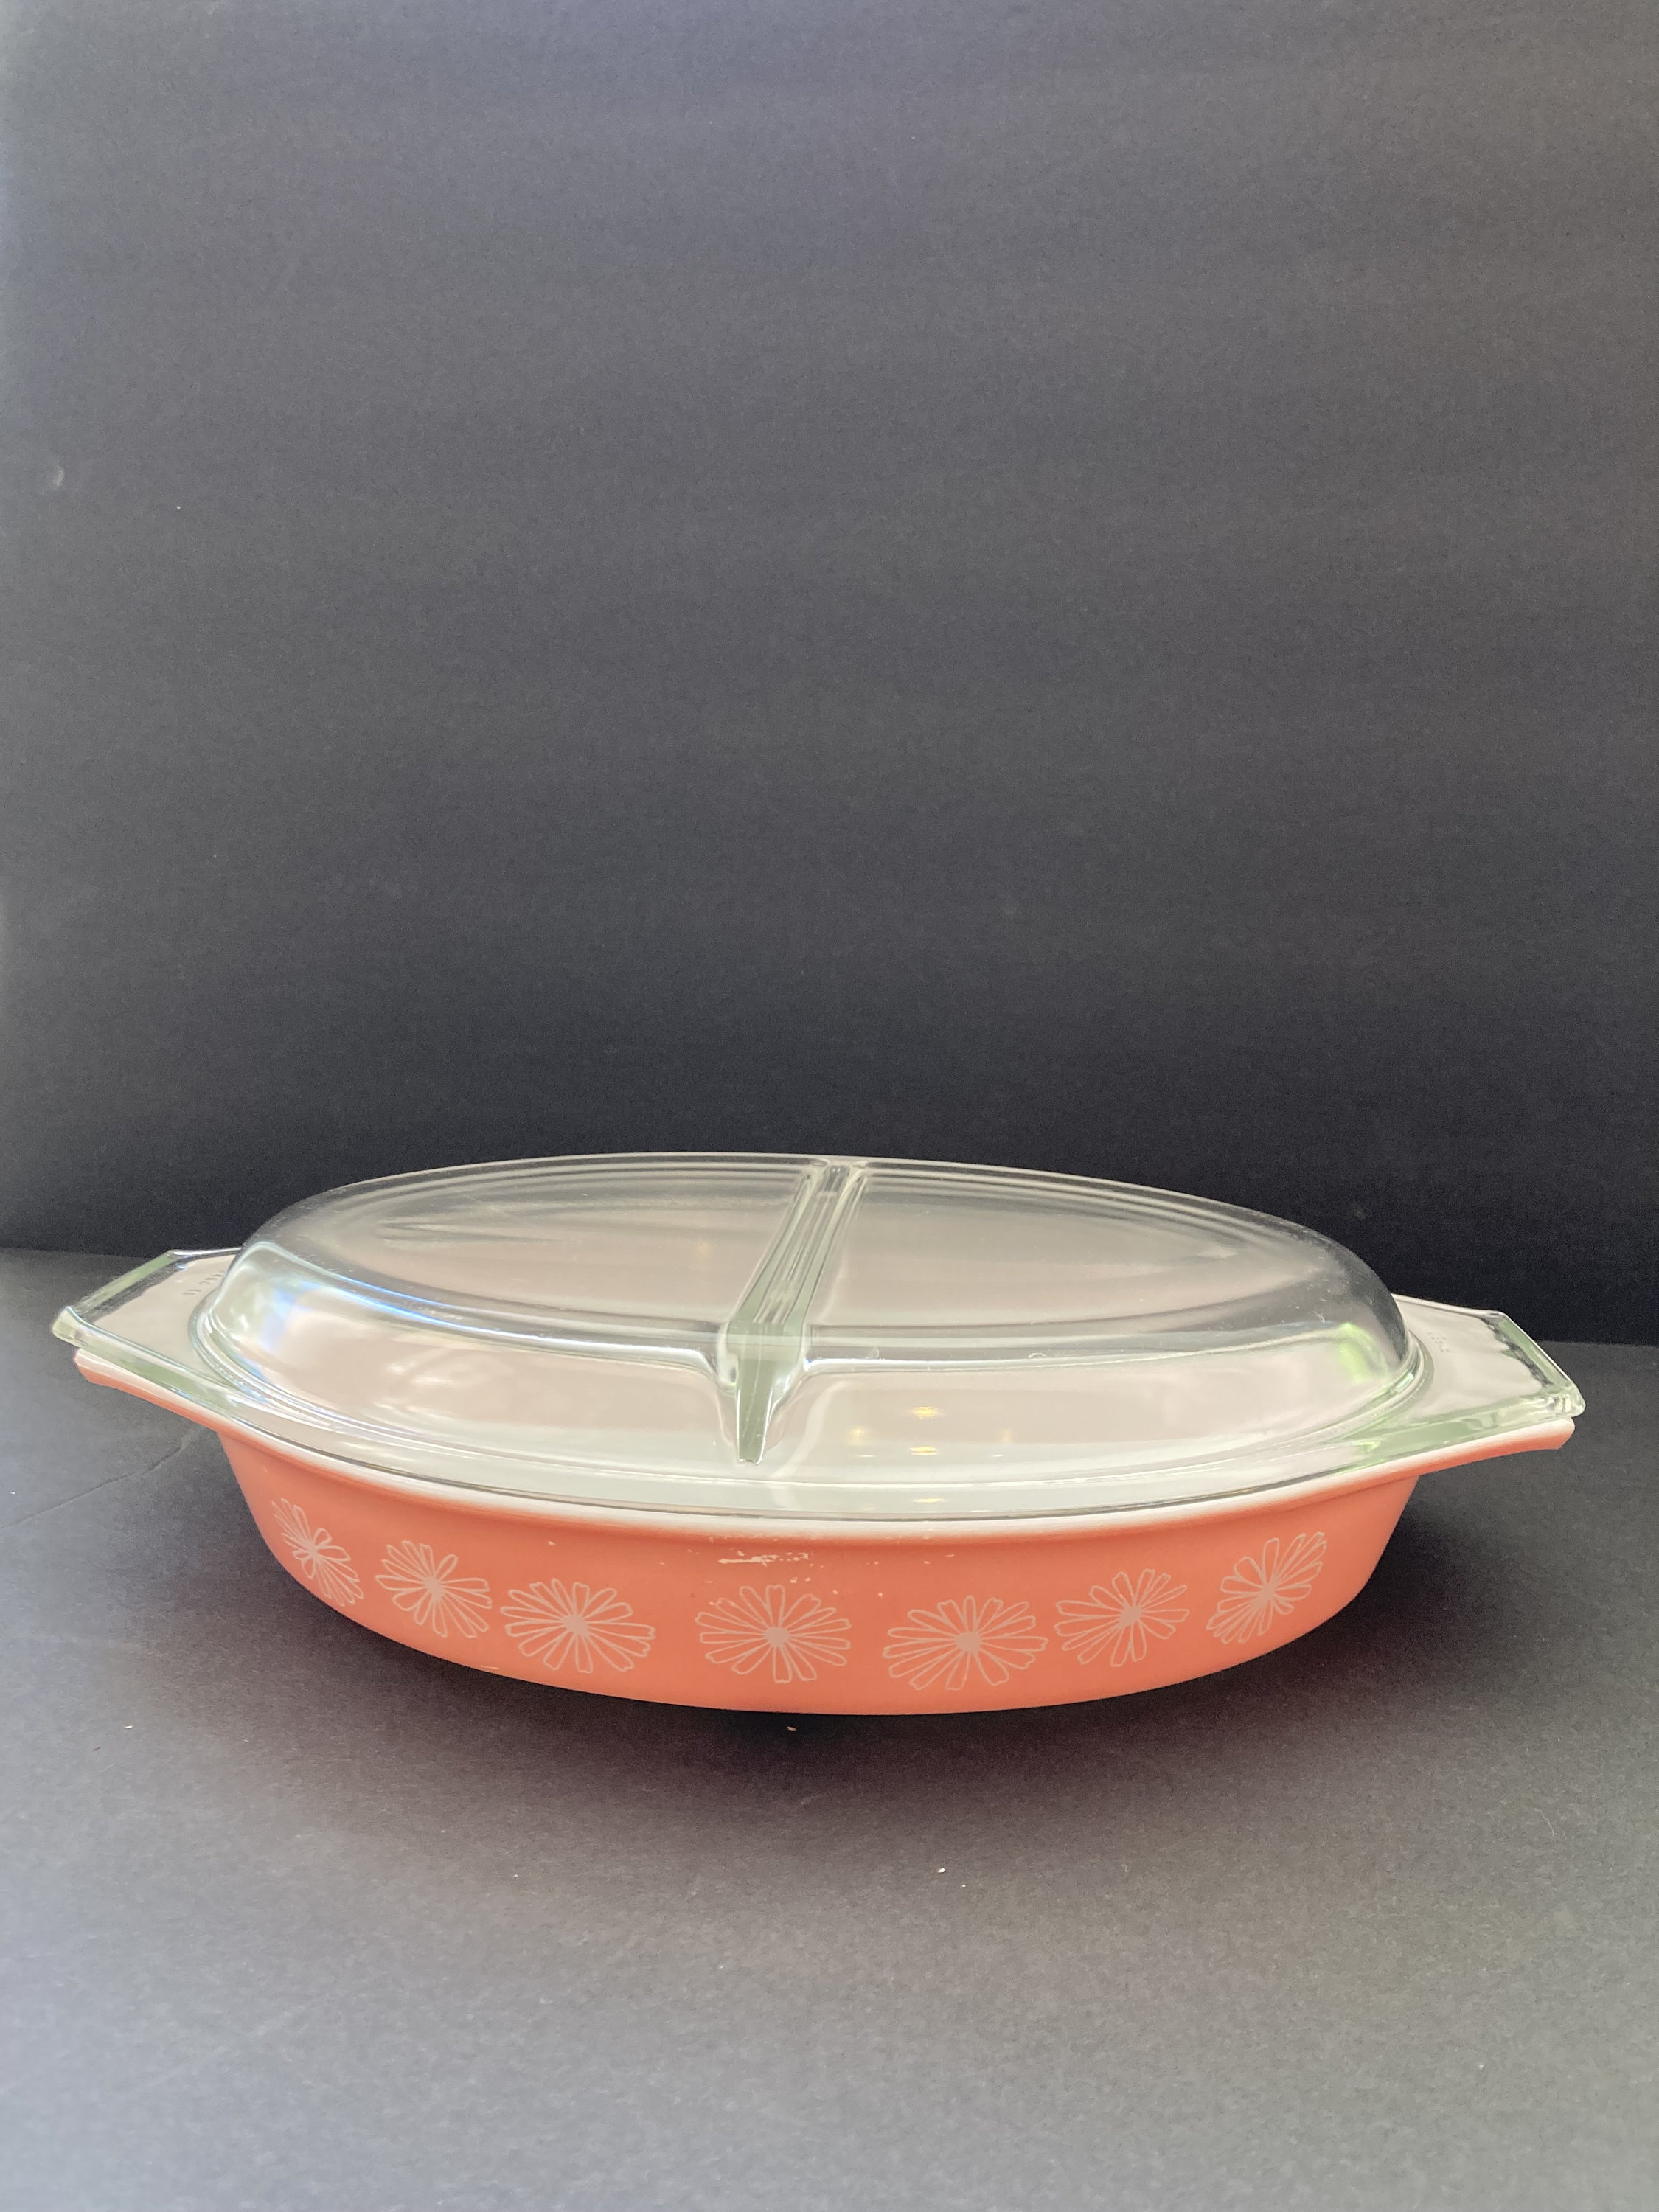 Pyrex Pink Daisy Divided Casserole Dish and Lid Vintage 1950s